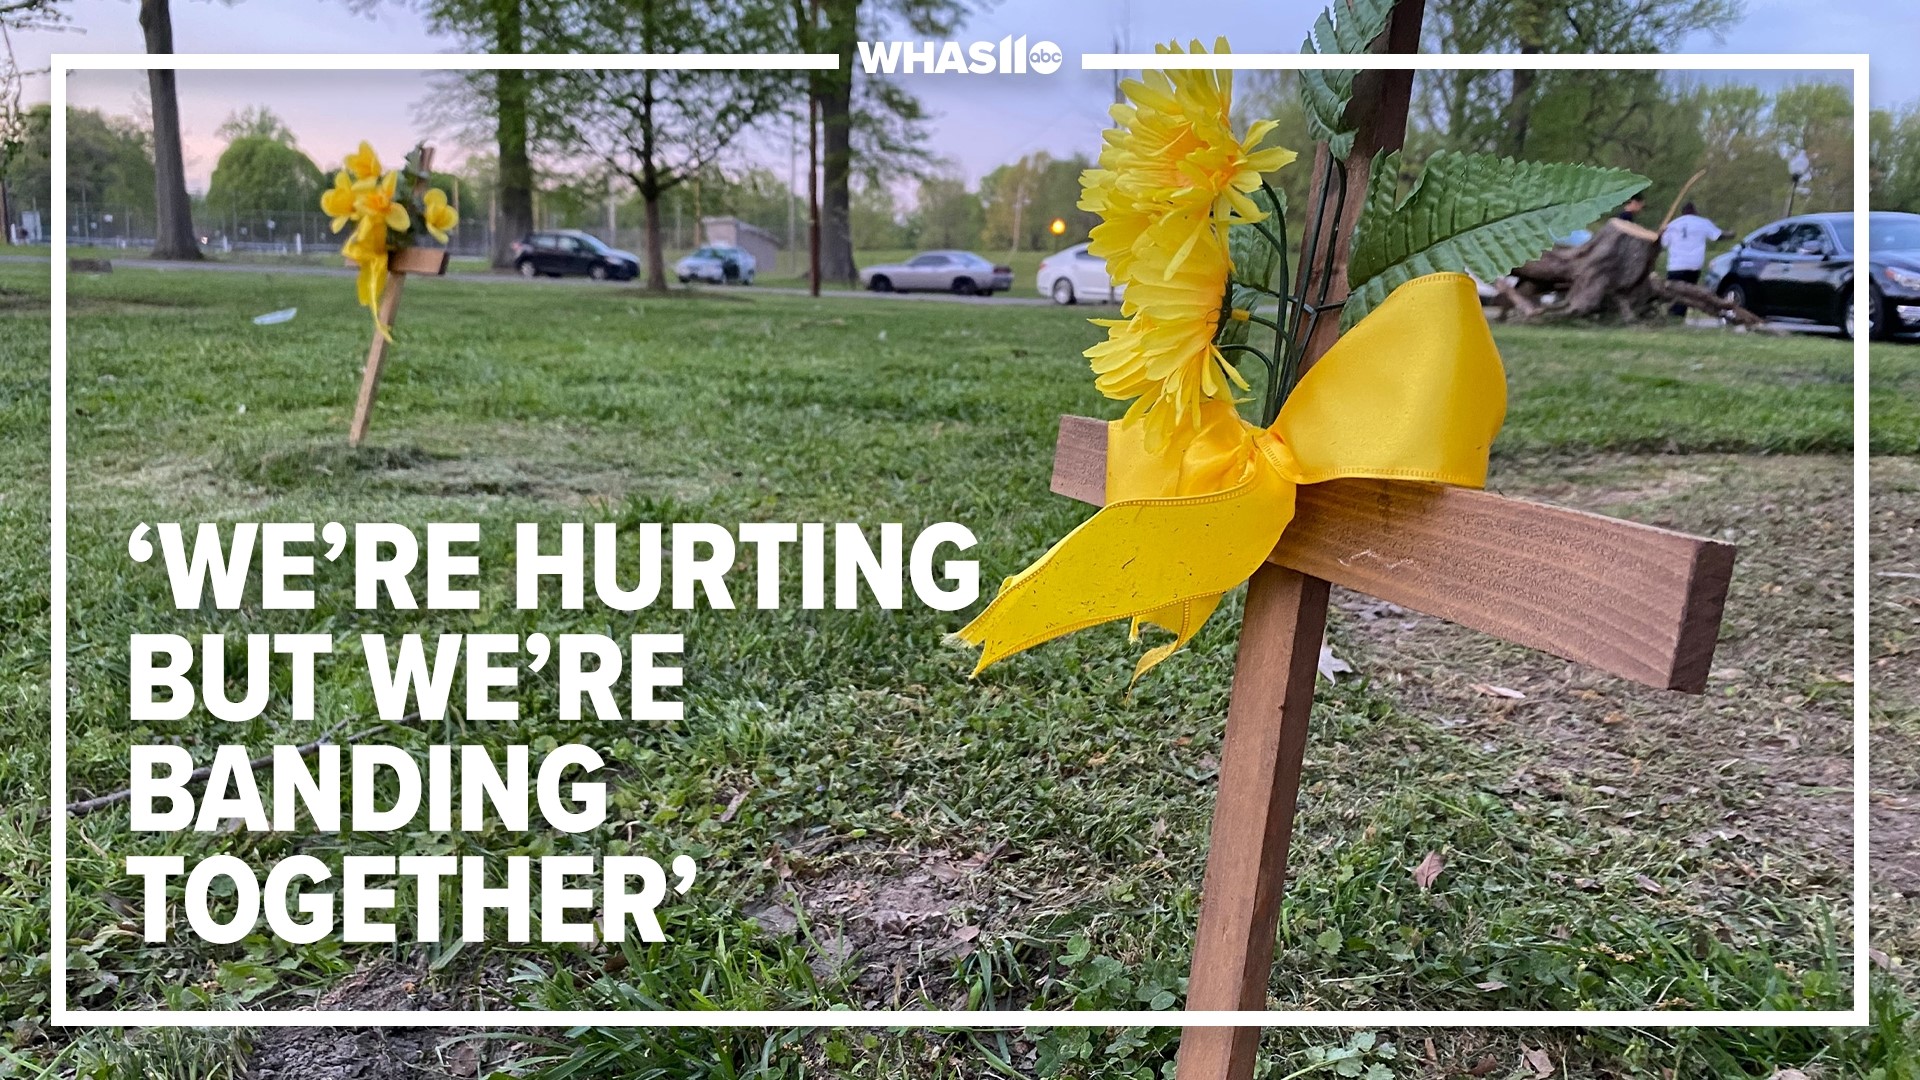 Community members gathered at Chickasaw Park Wednesday, and were silent for 54 seconds to honor the 54 homicide victims lost this year as of Monday.